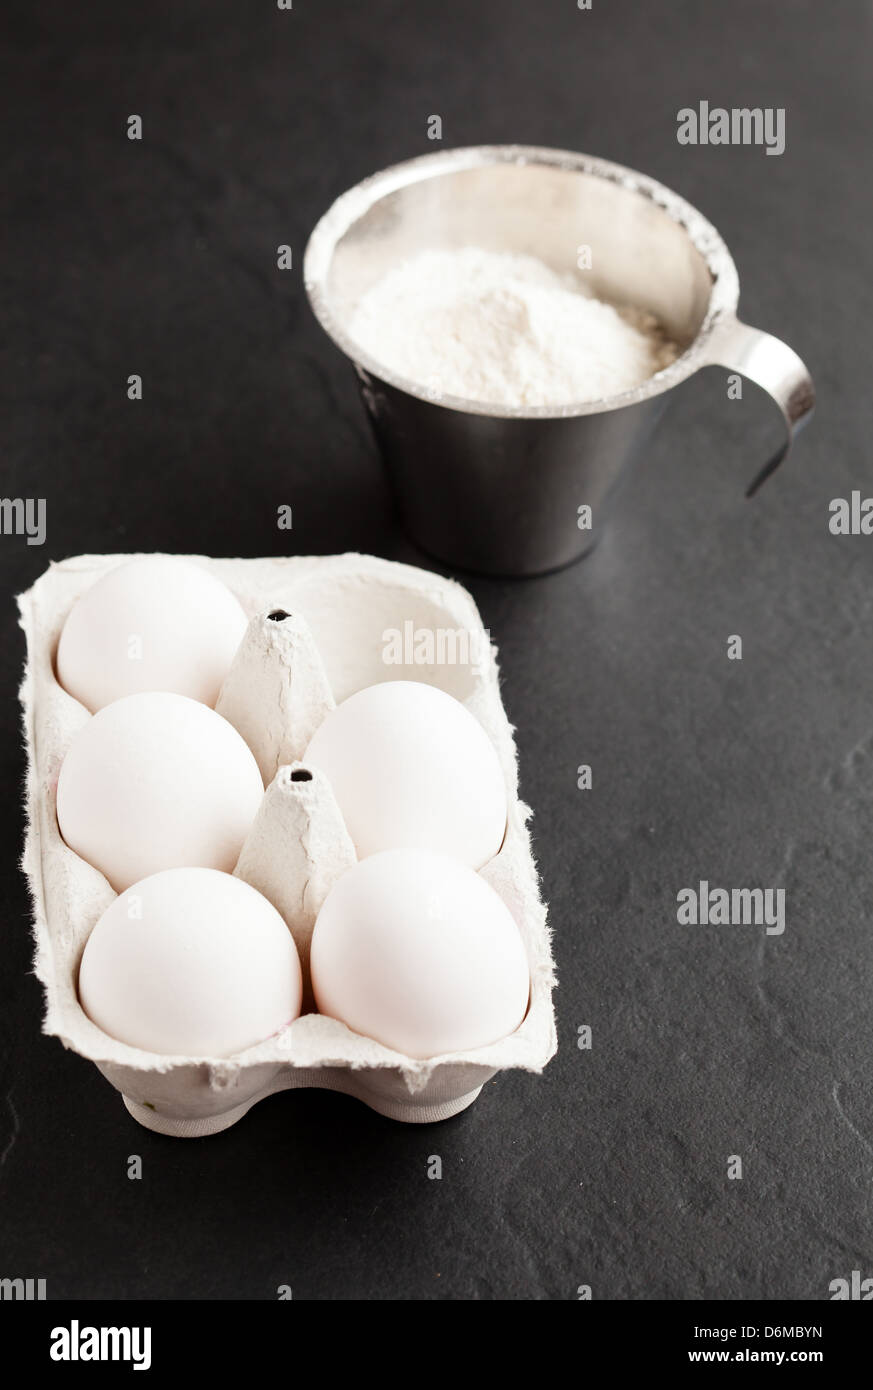 Chicken eggs in white carton with flour in metal measuring cup on dark background Stock Photo